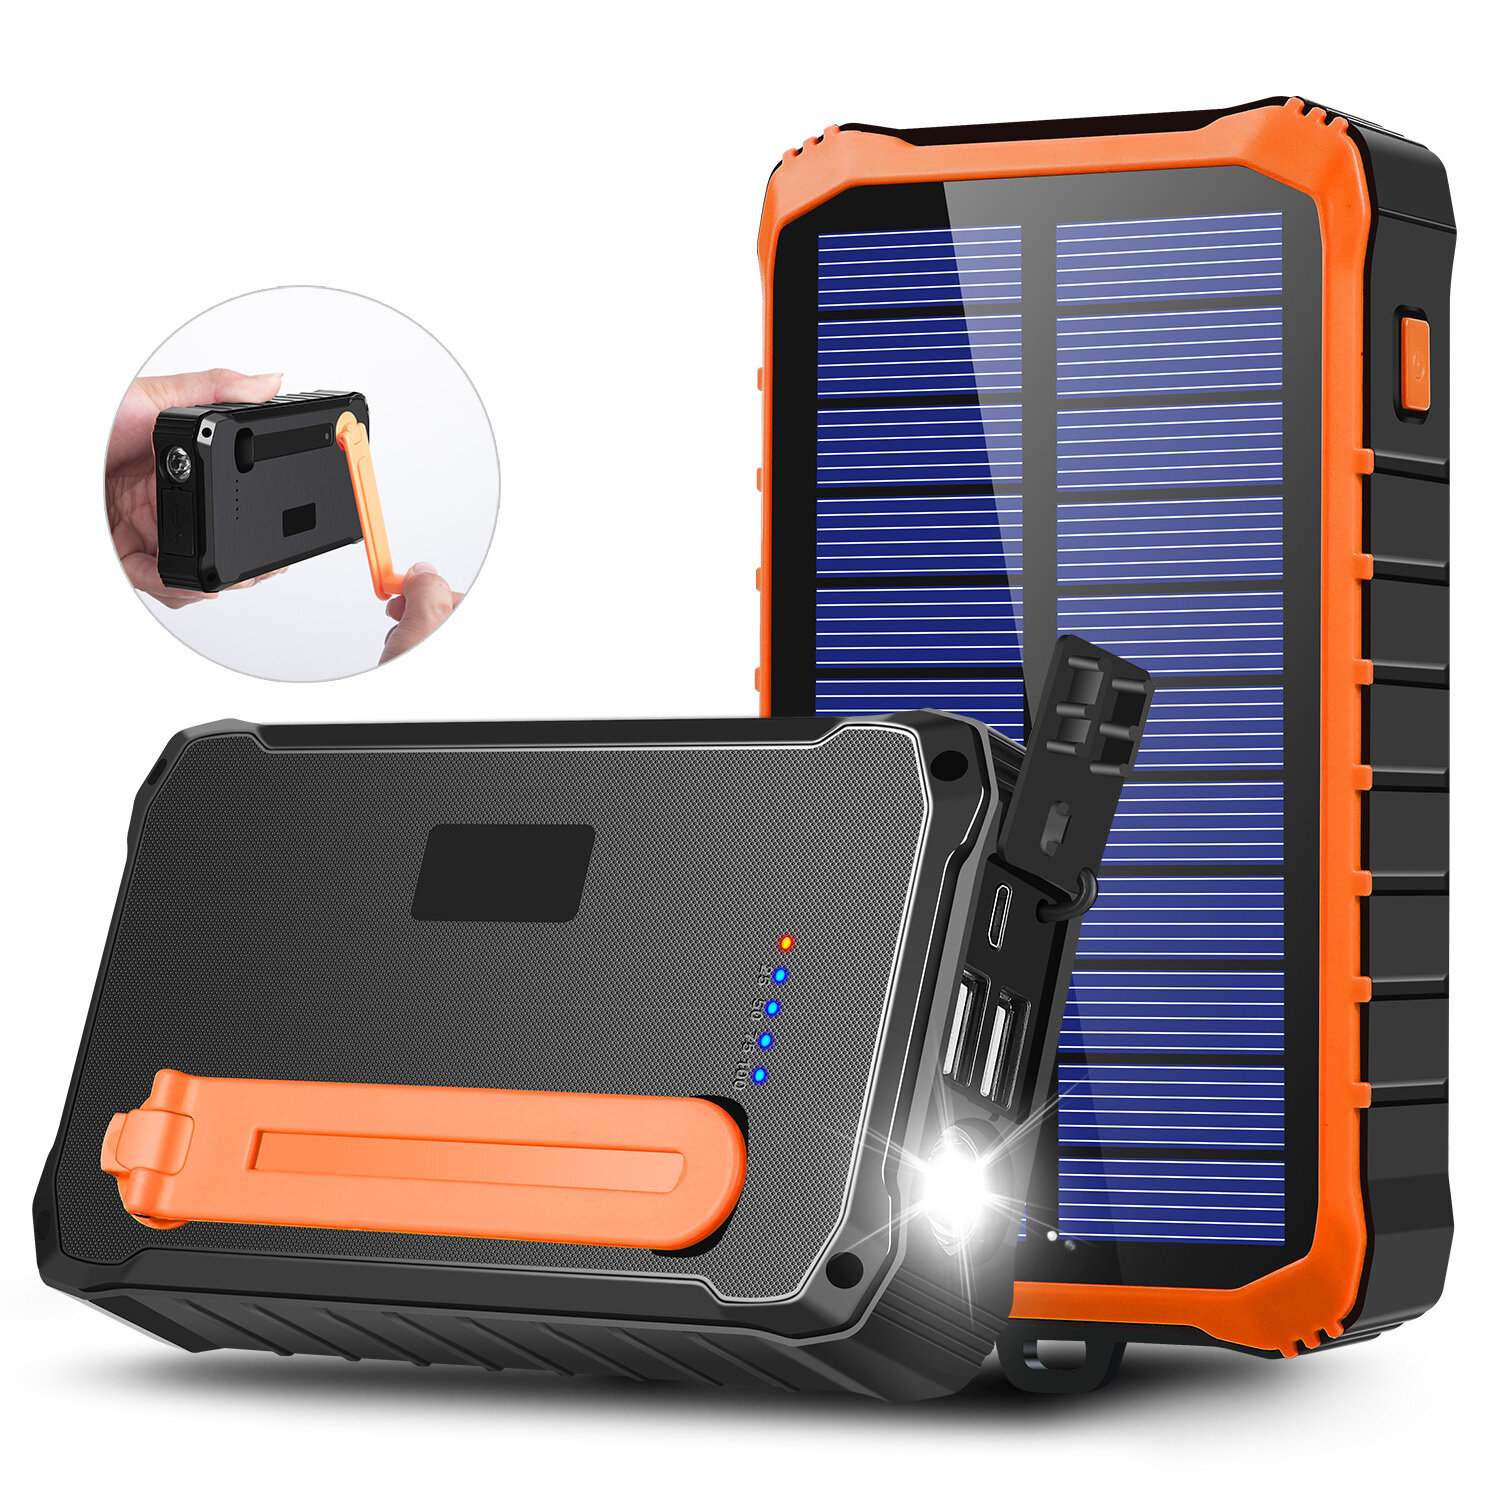 Bakeey WTKD-083 12000mAh Hand Crank Emergency Solar Power Phone Charger Power Bank for Samsung Galaxy S21 Note S20 ultra